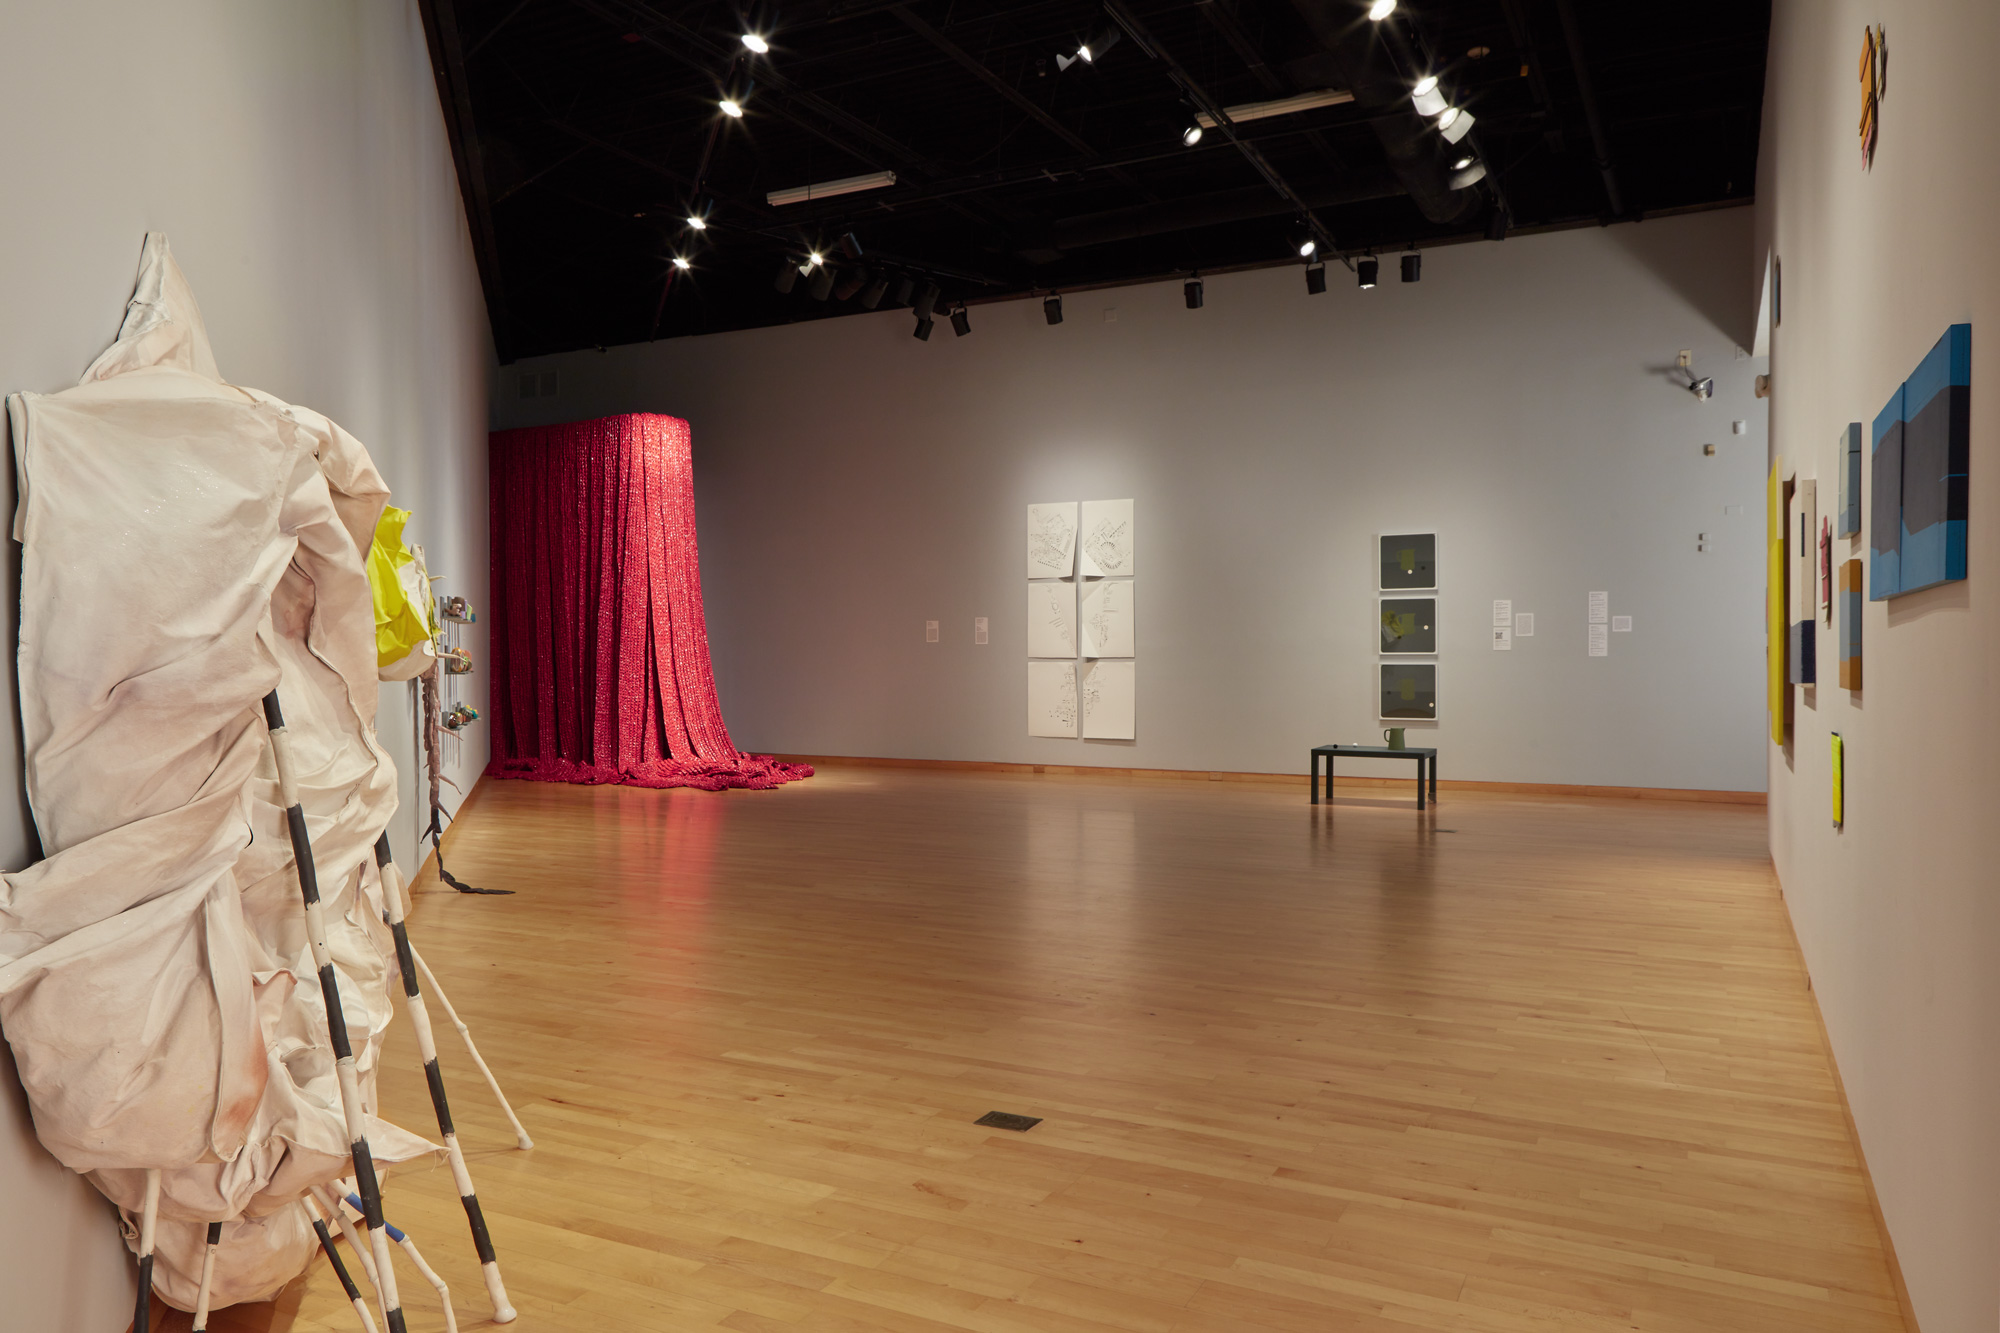 Installation view of Skyway 20/21 exhibition at USF Contemporary Art Museum. Left to right: works by Cynthia Mason, Kodi Thompson, Akiko Kotani, Rosemarie Chiarlone, Ry McCollough, and Babette Herschberger. Photo: Will Lytch.